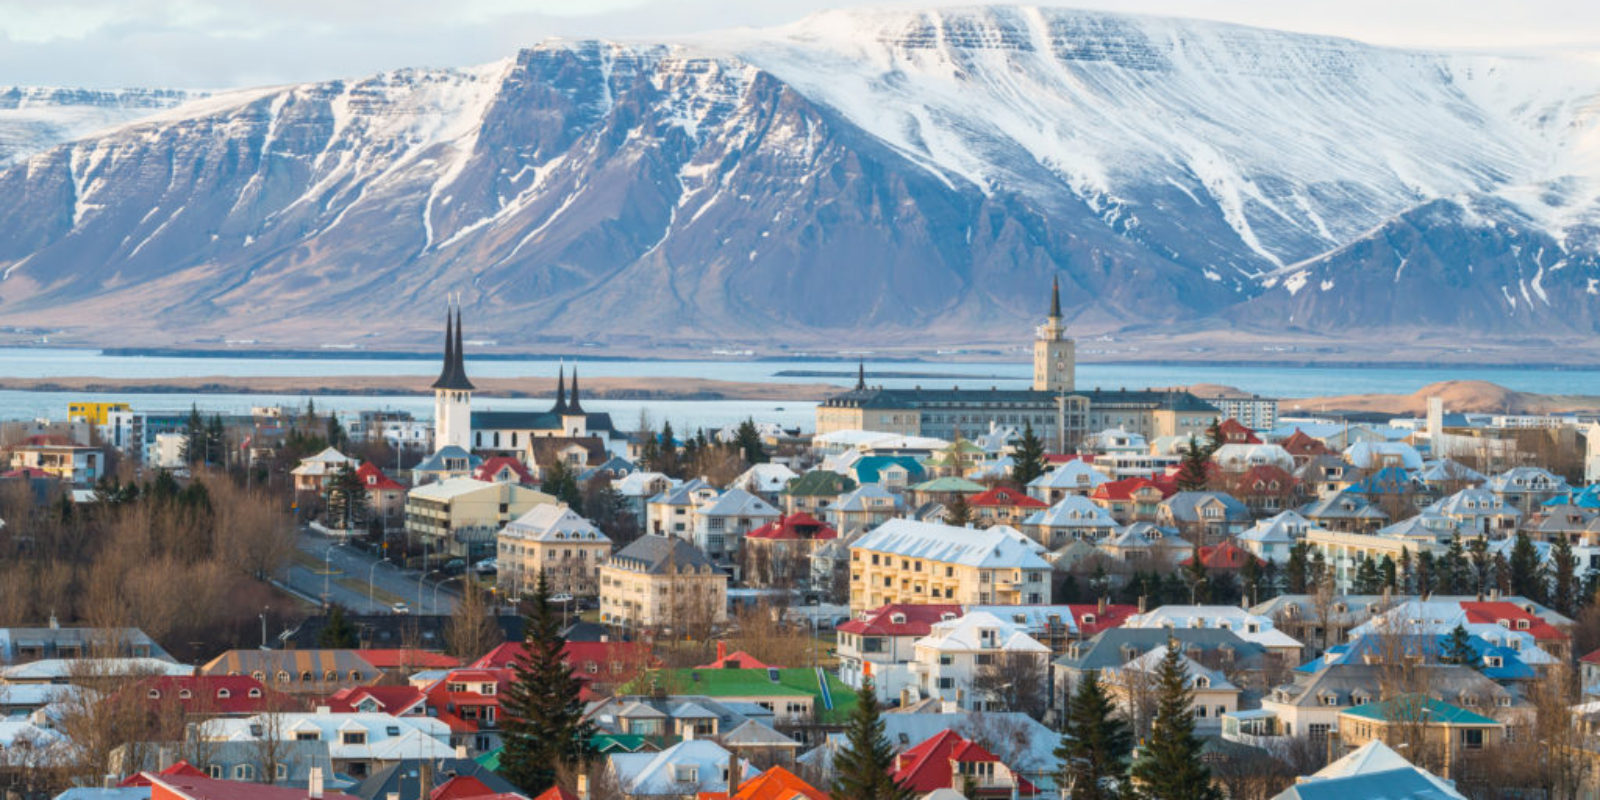 Iceland is high on many people's bucket list. It's got adventure, nature, wildlife, and luxury all rolled into one tiny (ok, 18th largest) island. Did you know that Reykjavik, Iceland is the northernmost world capital?